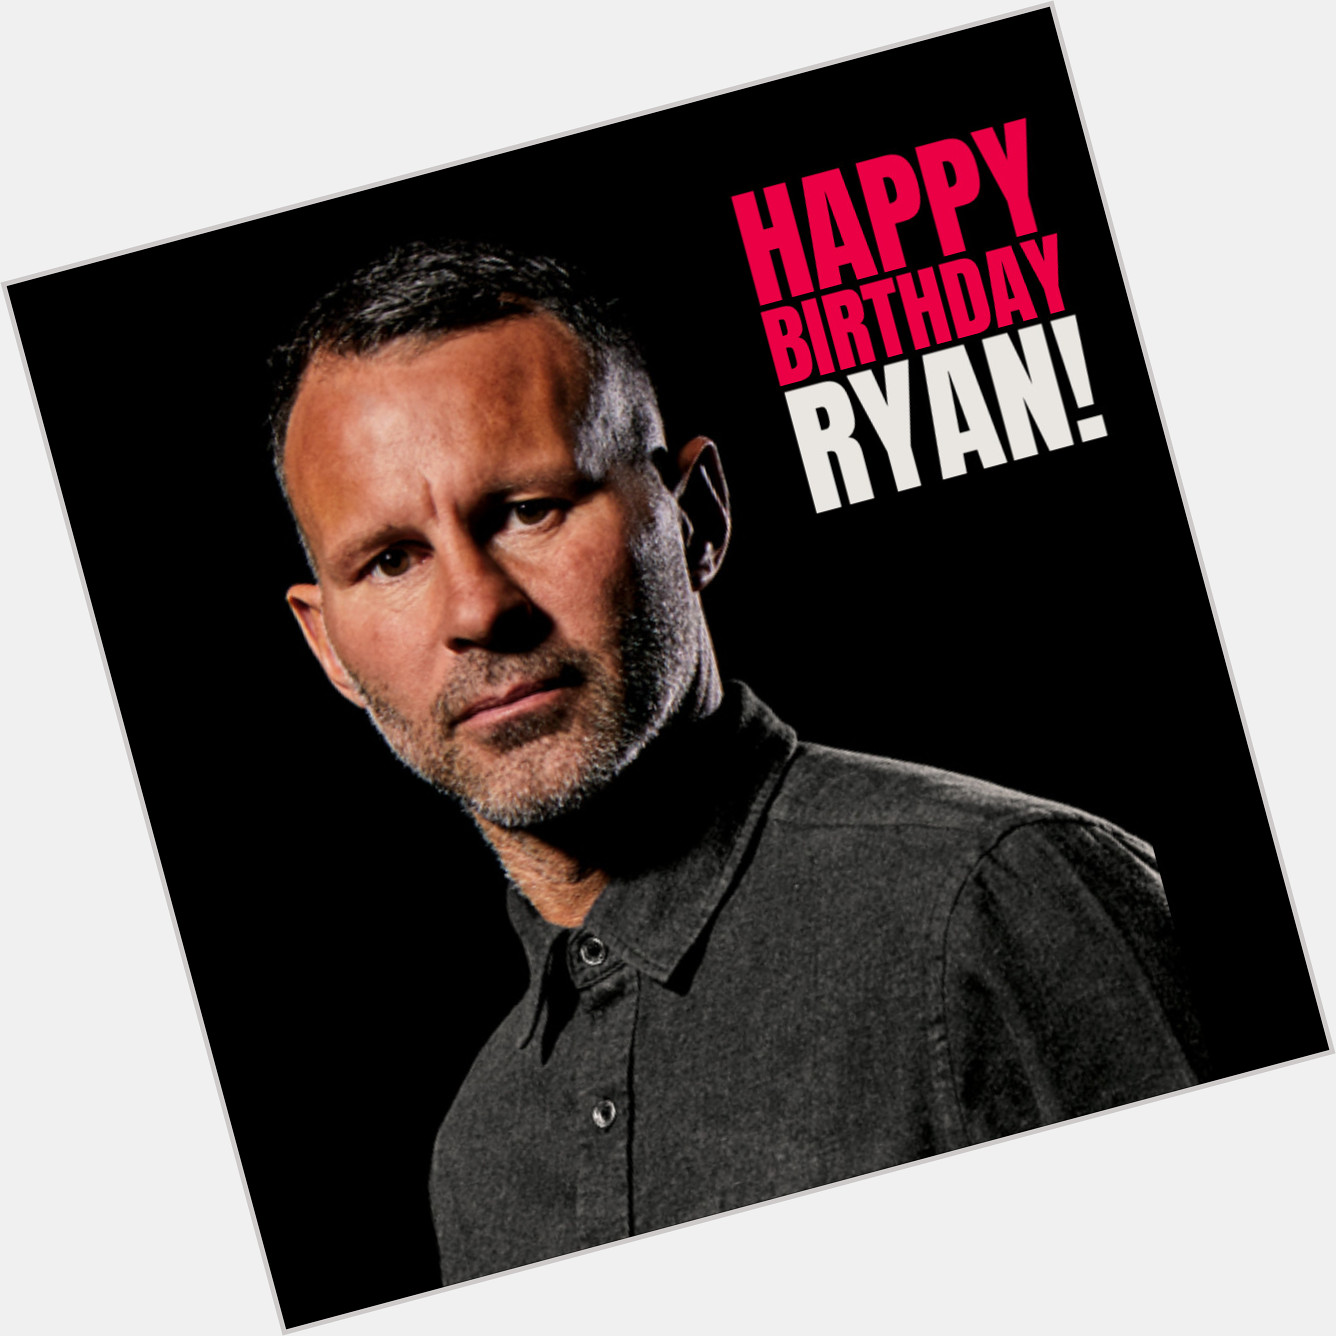 Wishing our co-founder Ryan Giggs a happy birthday today from Team UA92 ! 